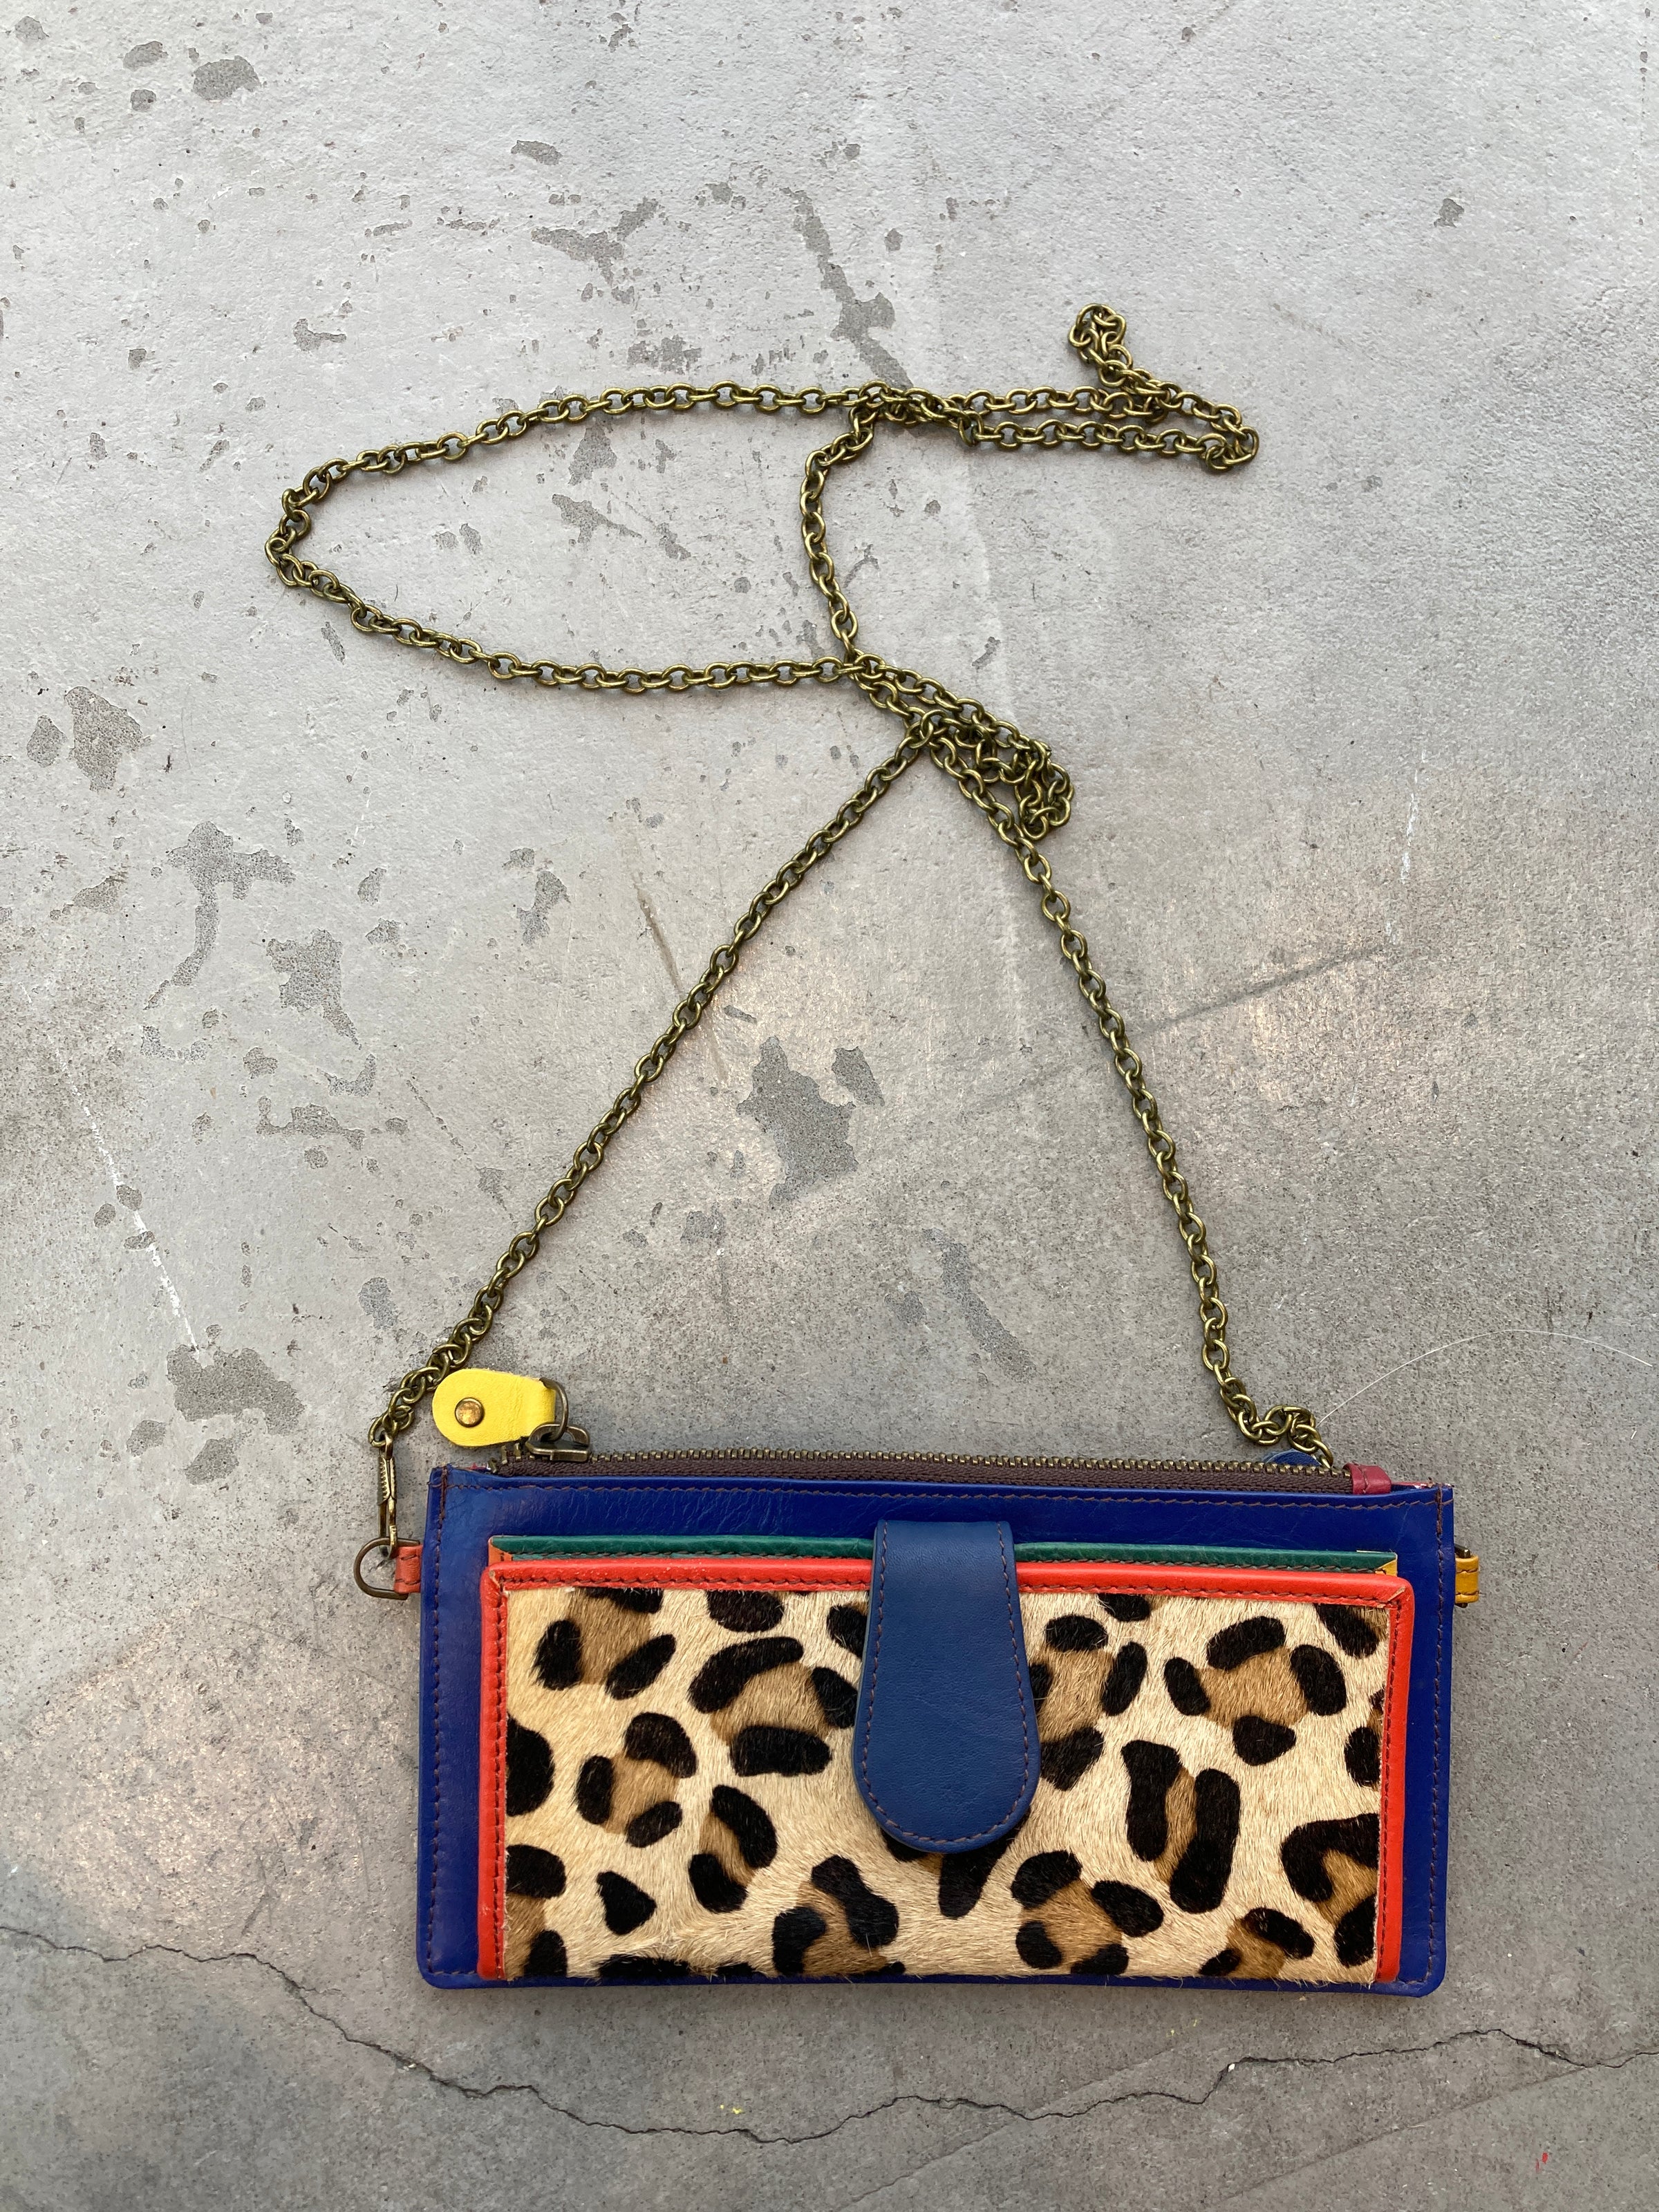 A small colorful leopard print clutch with a brass chain